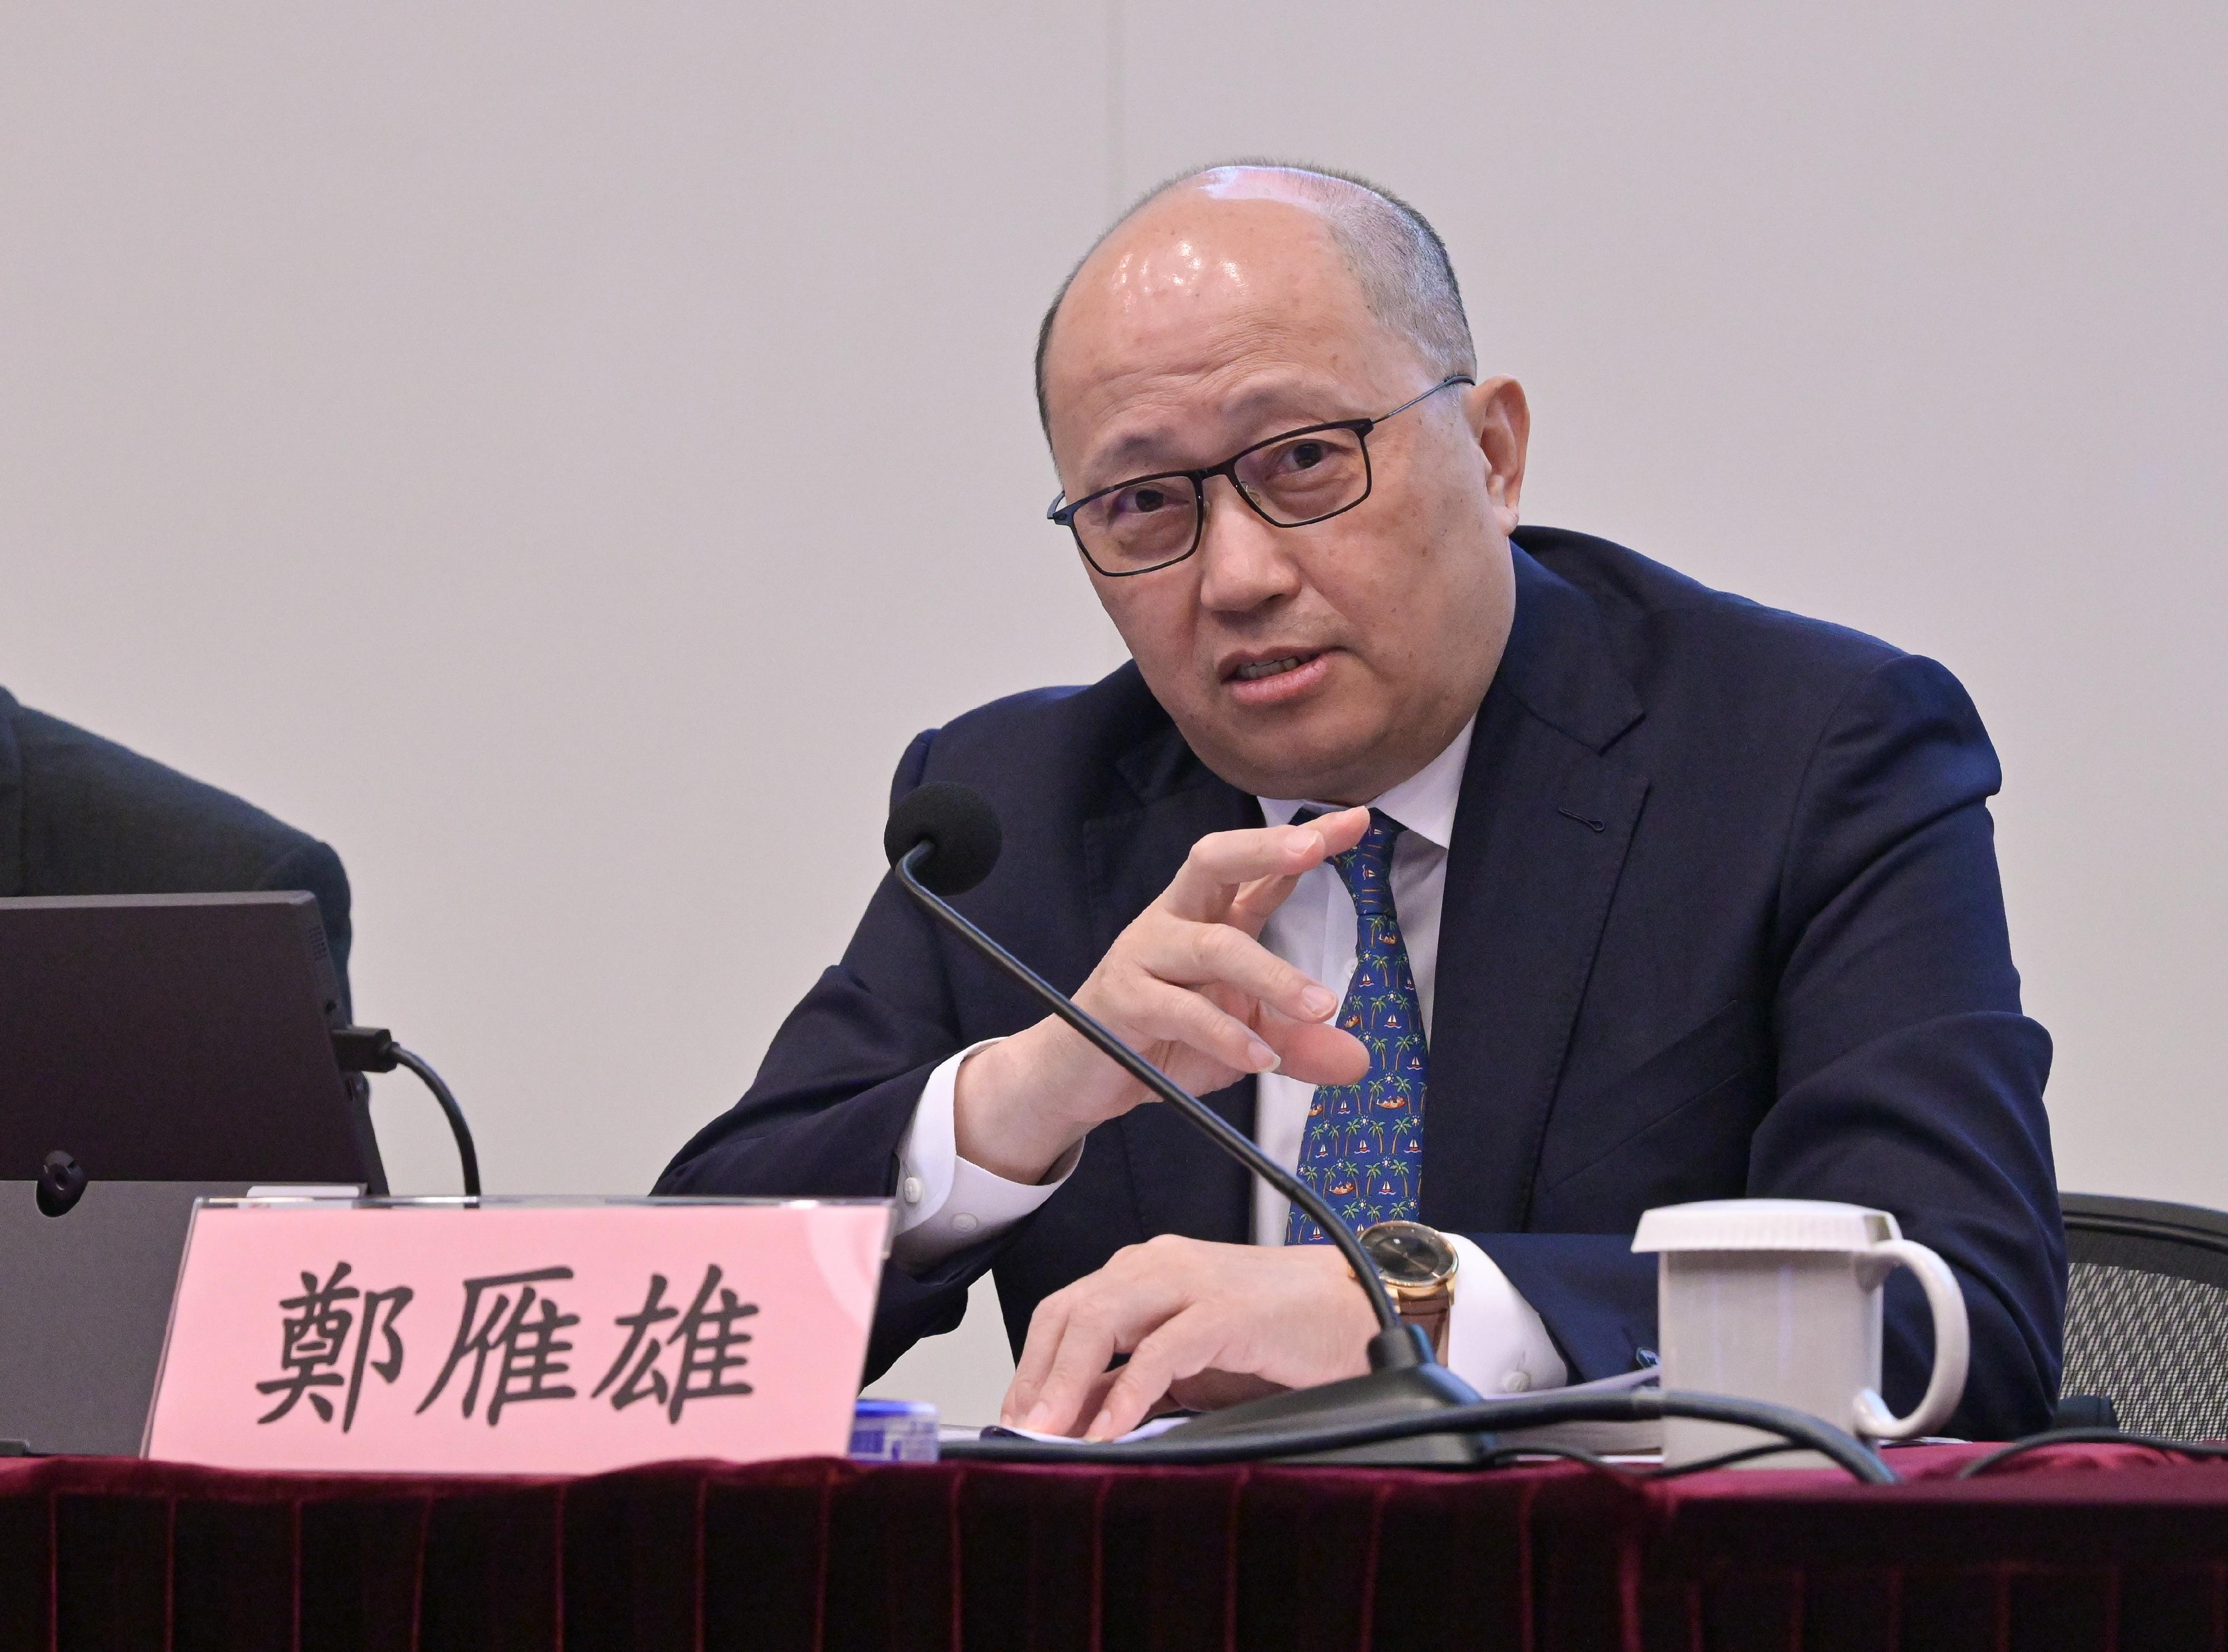 The Hong Kong Special Administrative Region (HKSAR) Government today (April 9) held a seminar on learning the spirit of the "two sessions" at the Central Government Offices. Photo shows the Director of the Liaison Office of the Central People's Government in the HKSAR, Mr Zheng Yanxiong, sharing his views at the seminar.
